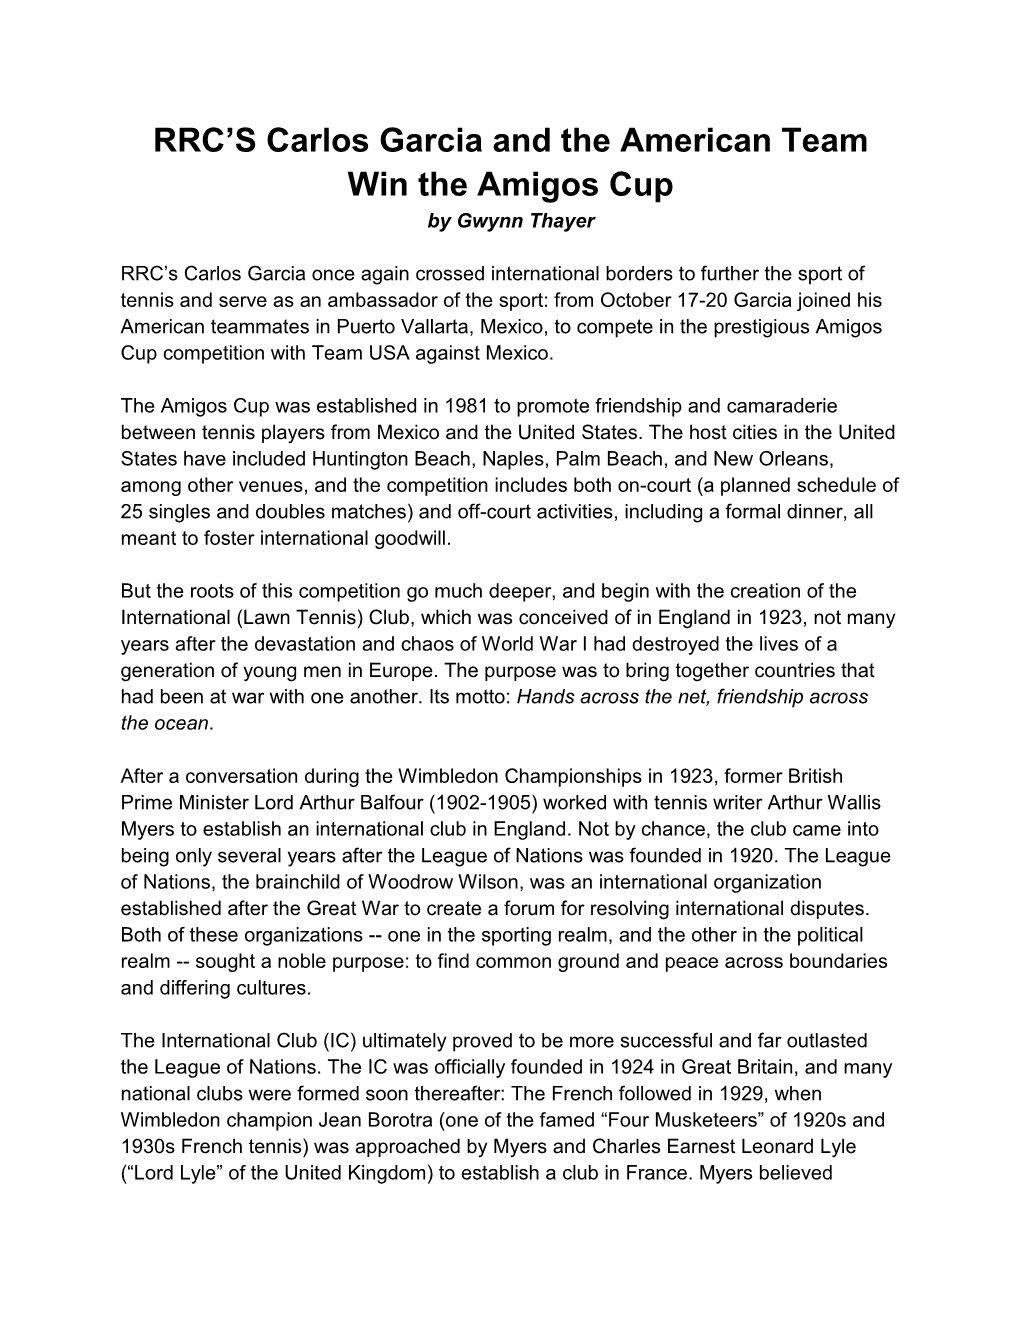 RRC's Carlos Garcia and the American Team Win the Amigos